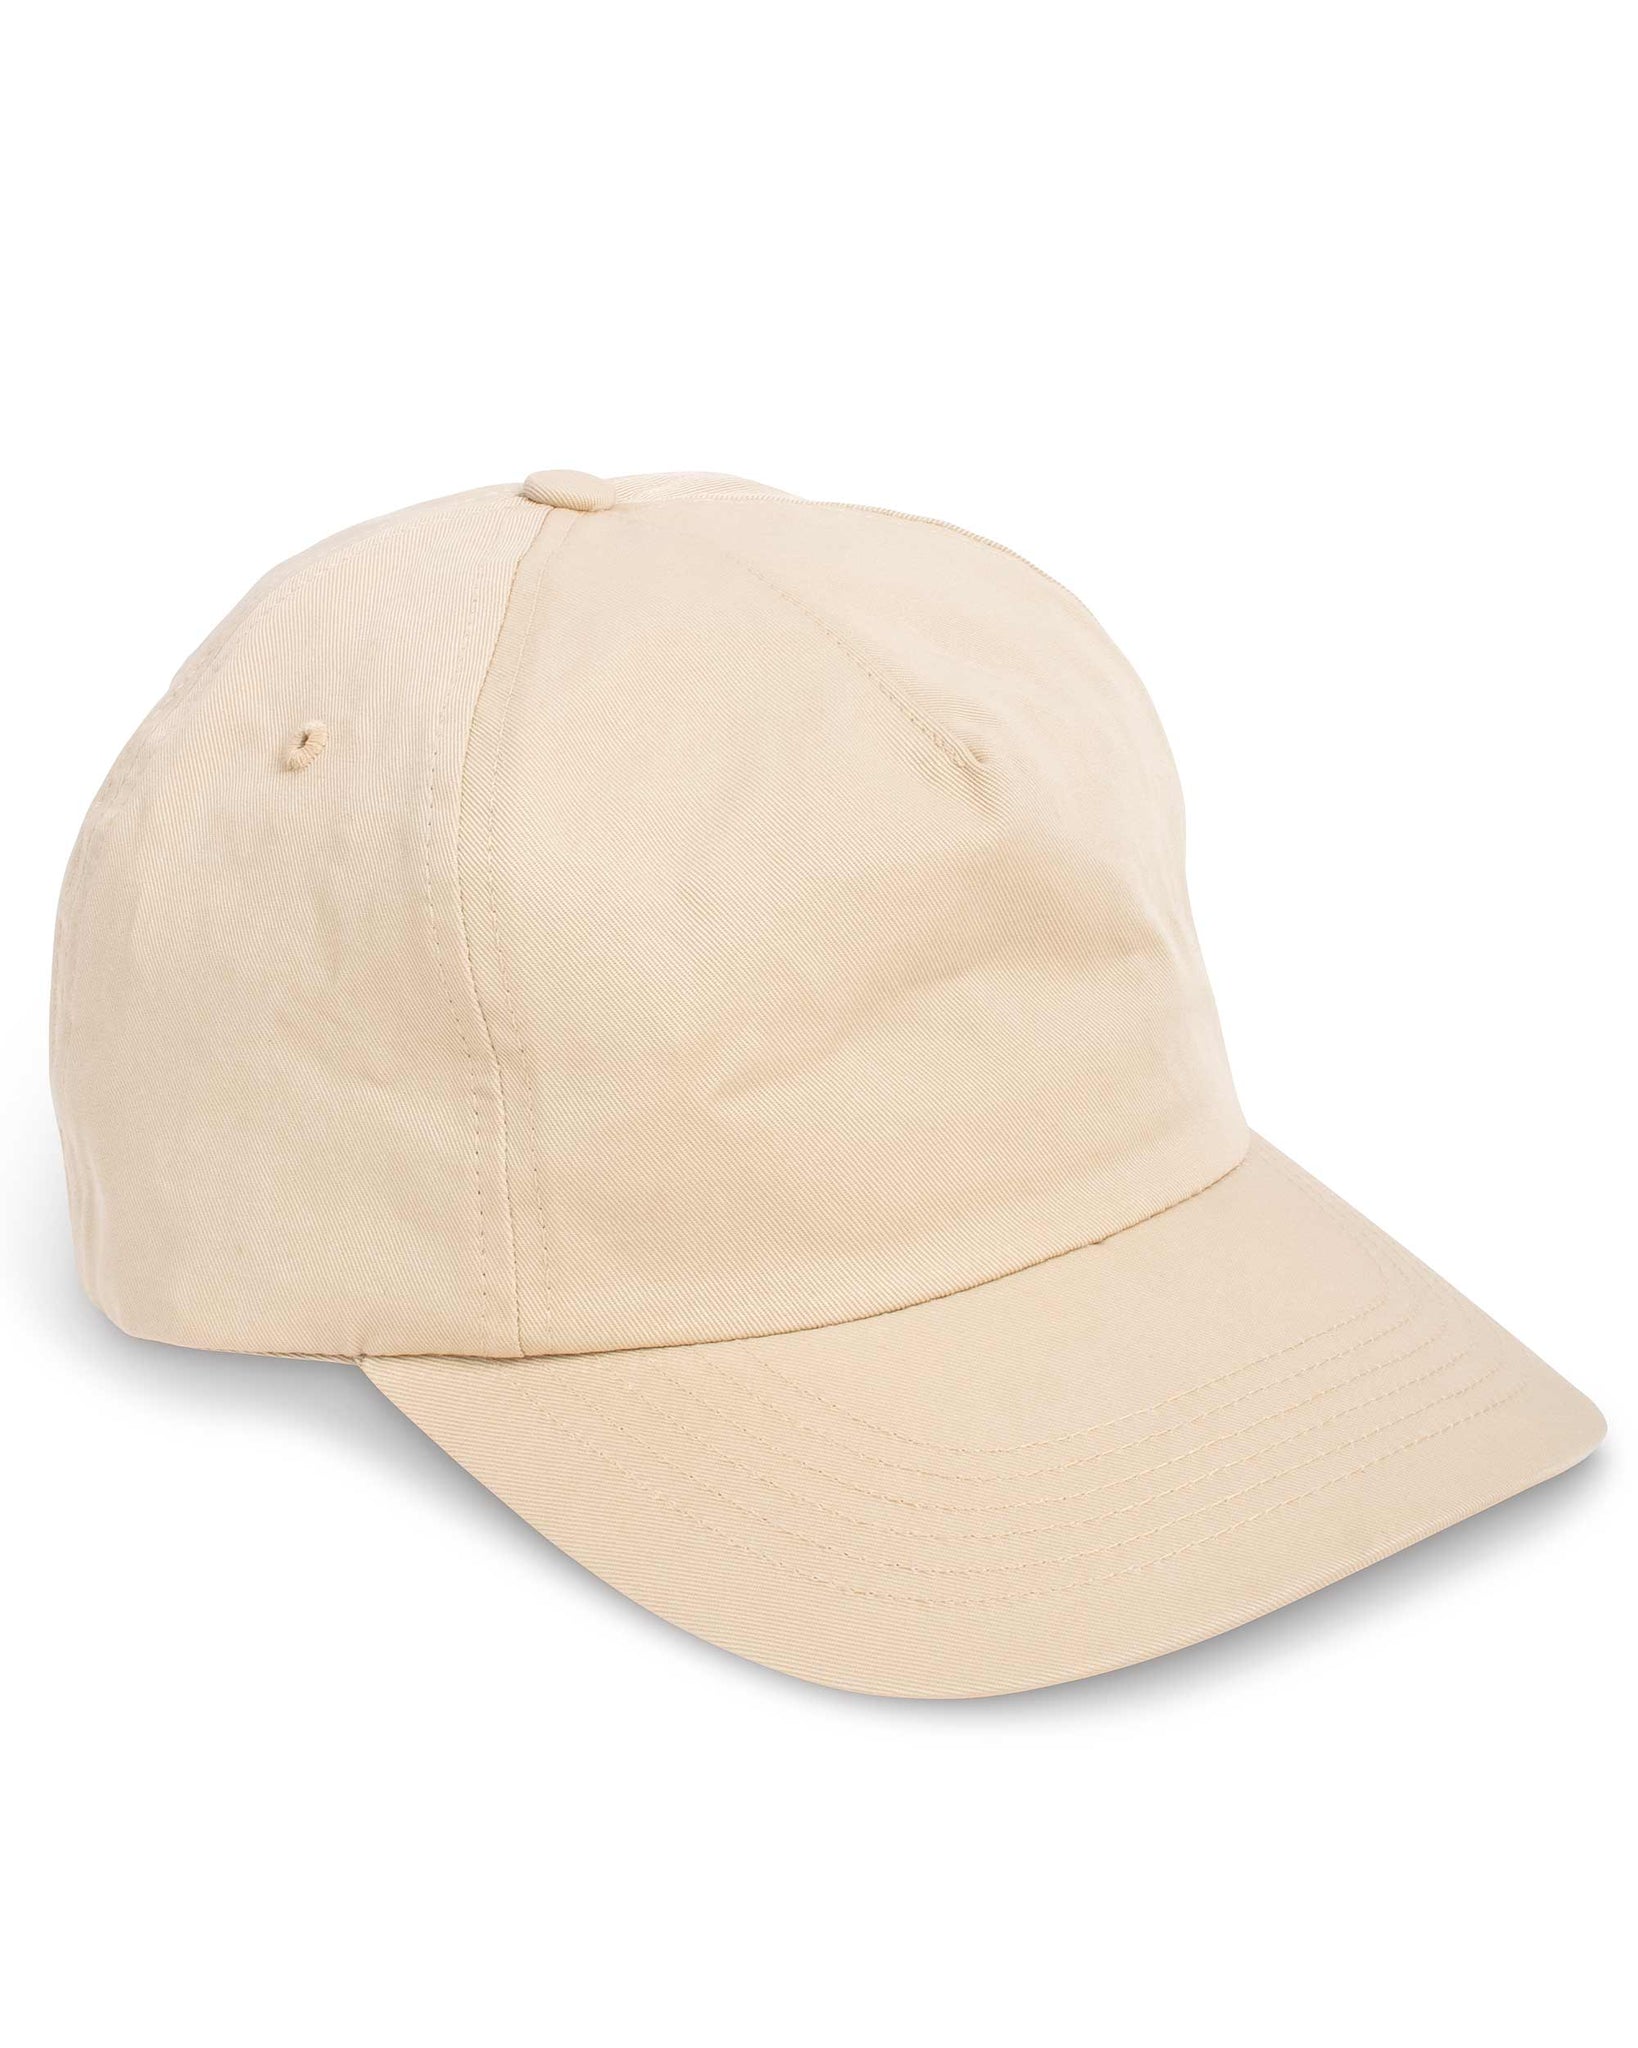 Lady White Co. Cotton Twill Cap Natural